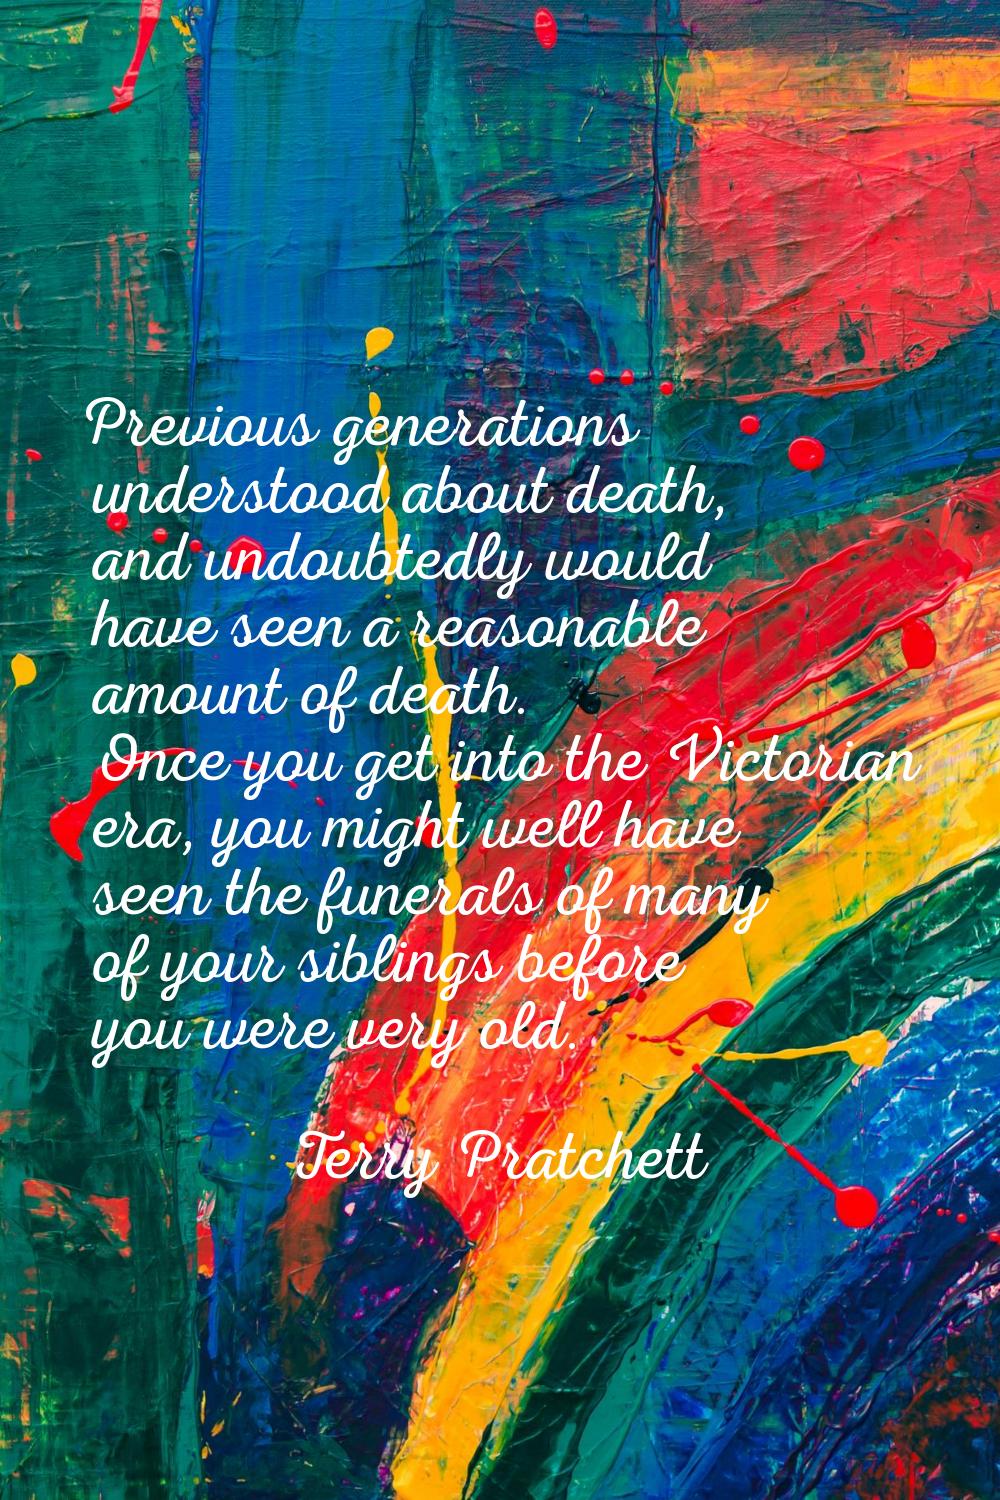 Previous generations understood about death, and undoubtedly would have seen a reasonable amount of